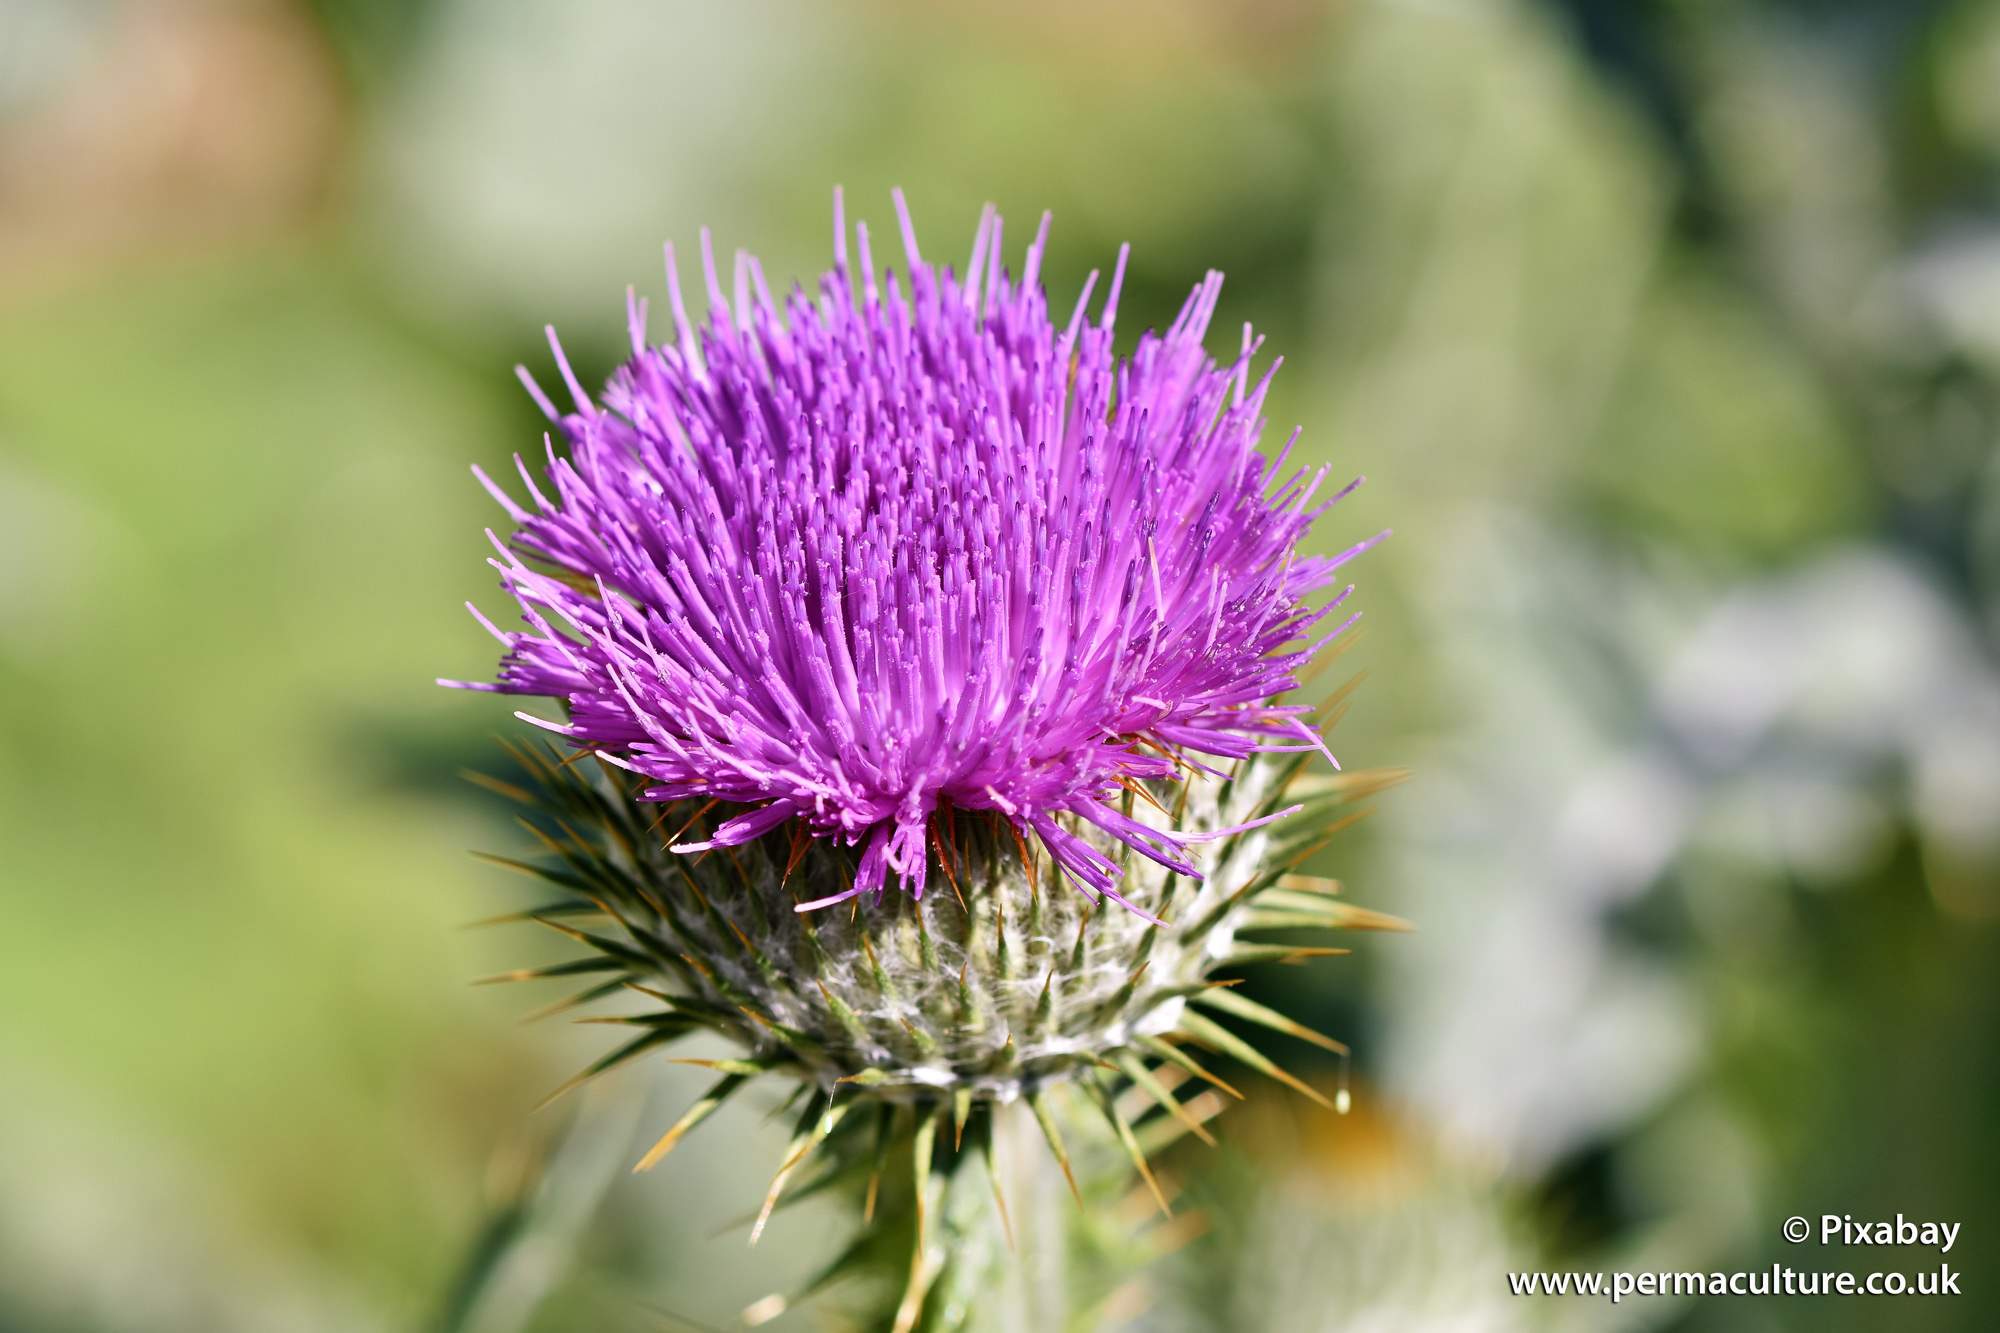 Thistles: A Highly Nutritious and Medicinal Weed